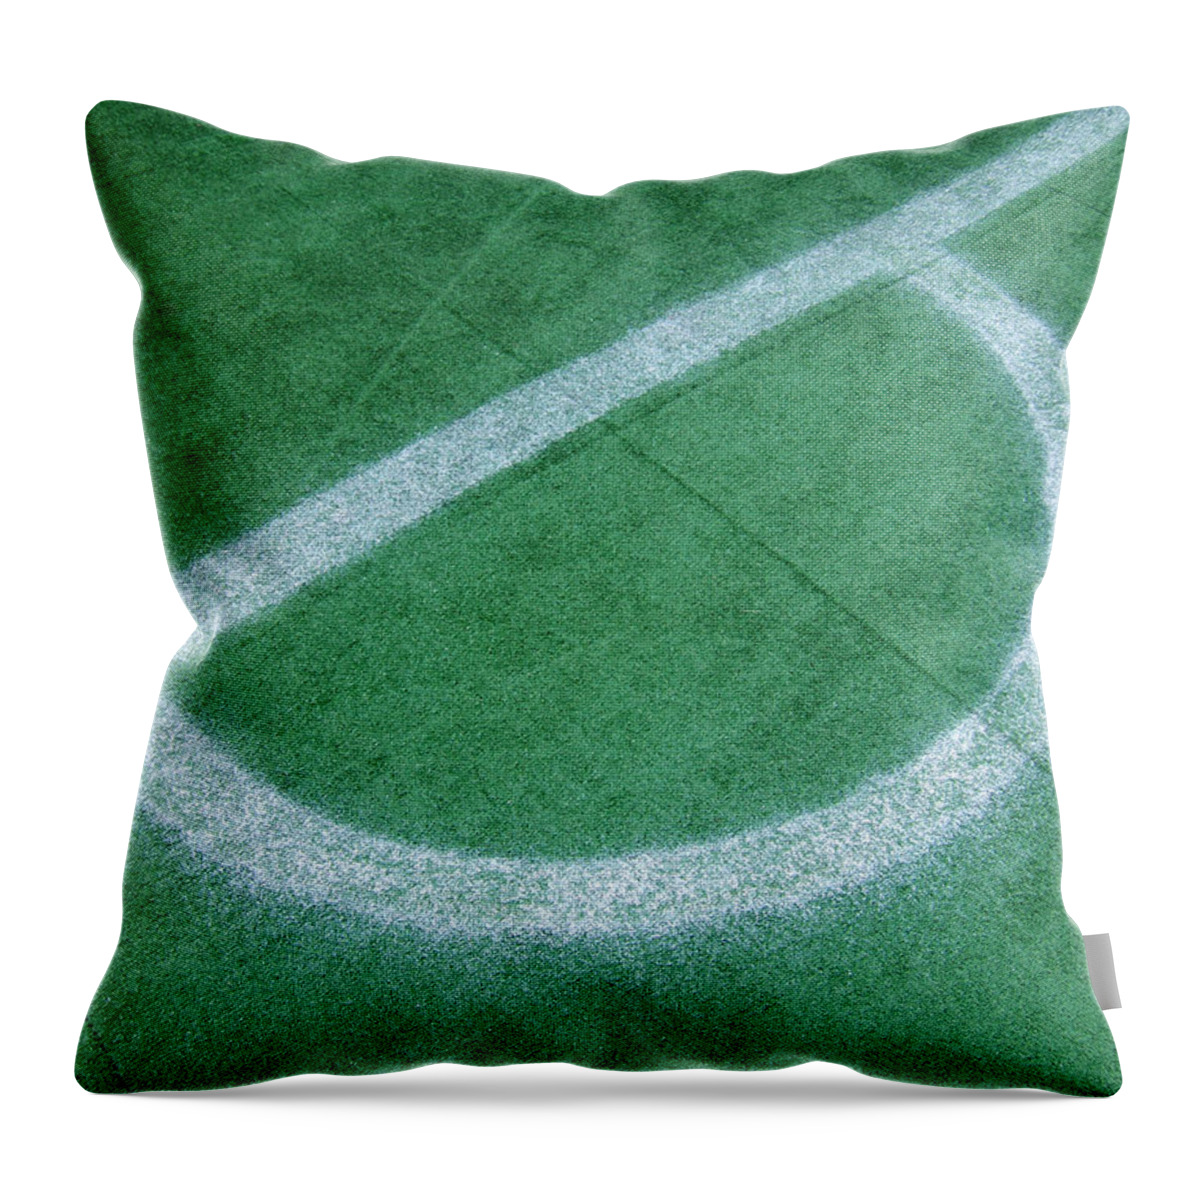 Soccer Field Throw Pillow featuring the photograph White markings on soccer field by Matthias Hauser